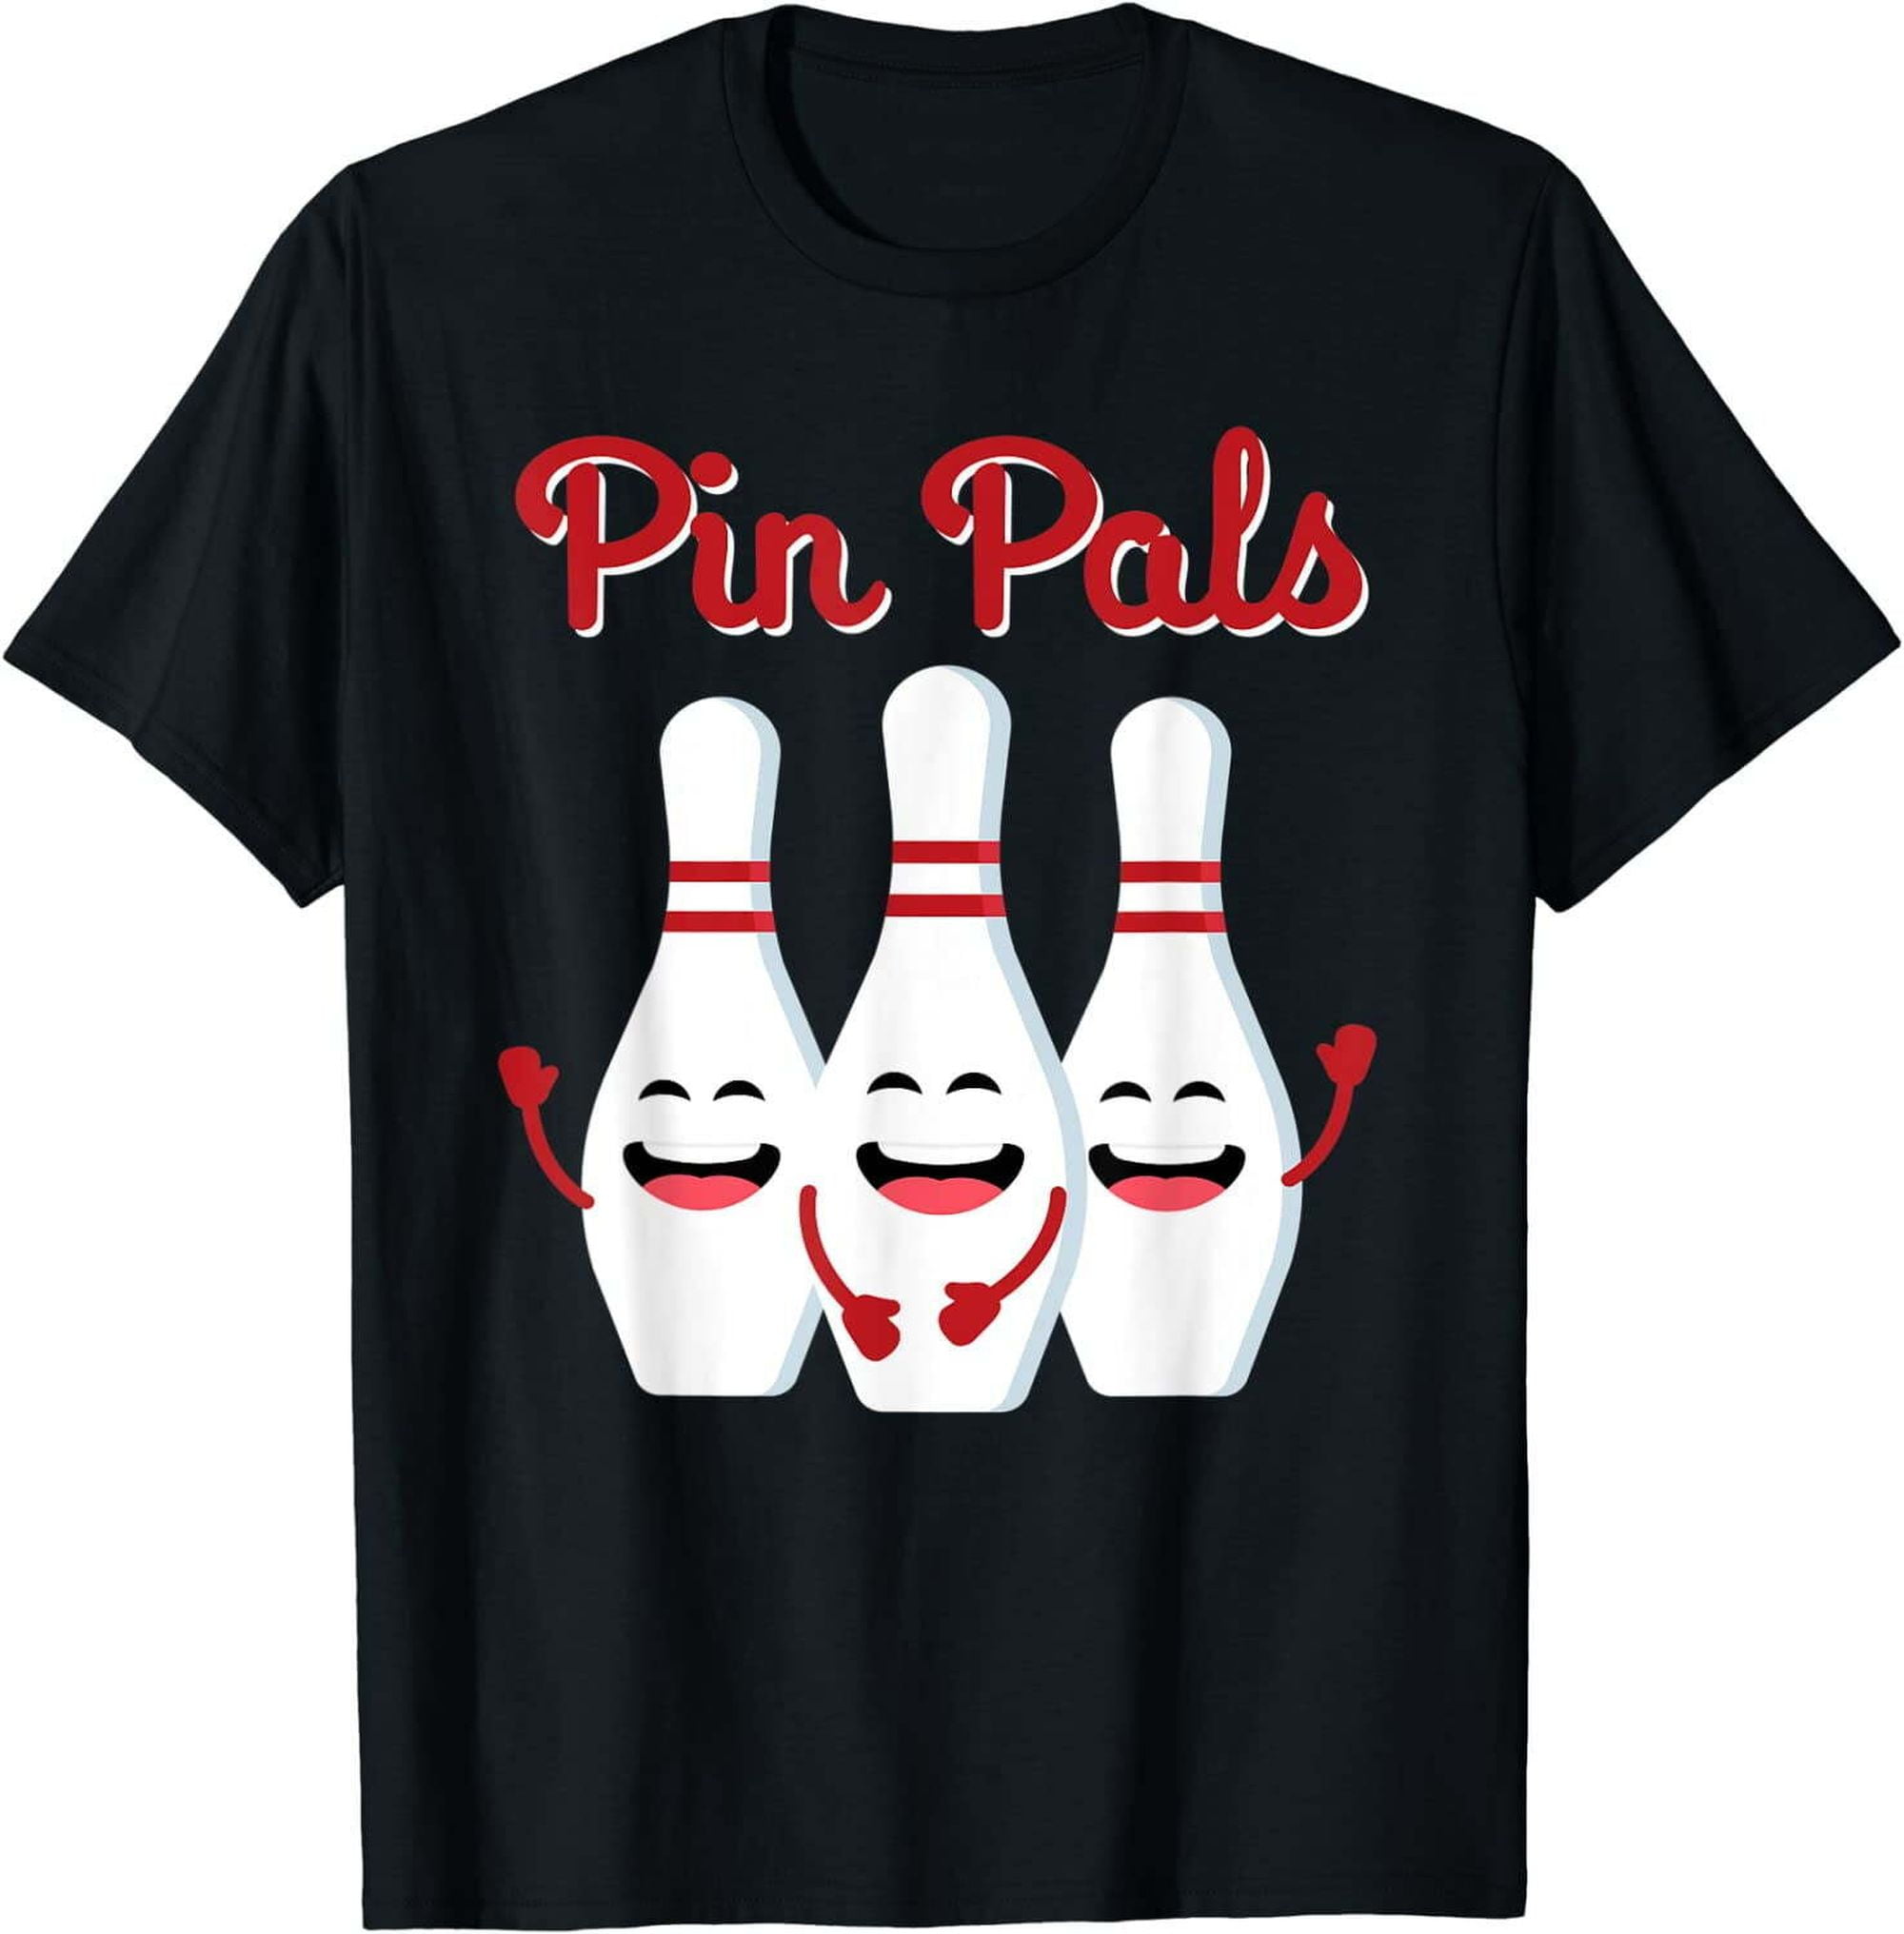 Strike in Style with Pin Pals: Adorable Bowling Shirts for Men, Women ...